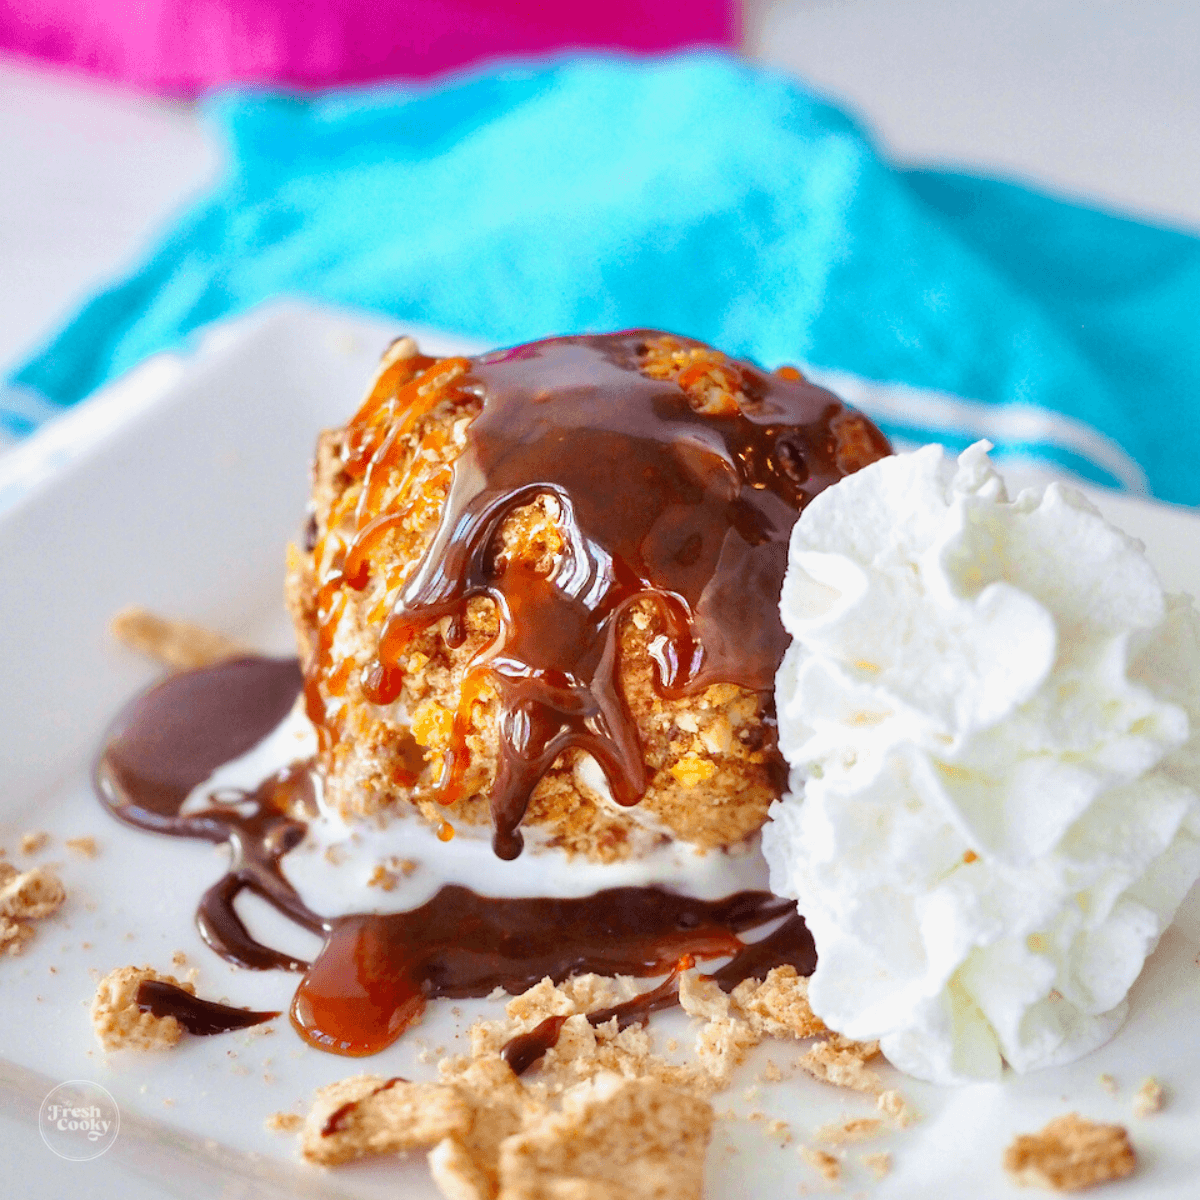 https://www.thefreshcooky.com/wp-content/uploads/2022/05/Fried-Ice-Cream-Air-Fryer-Square-2.png